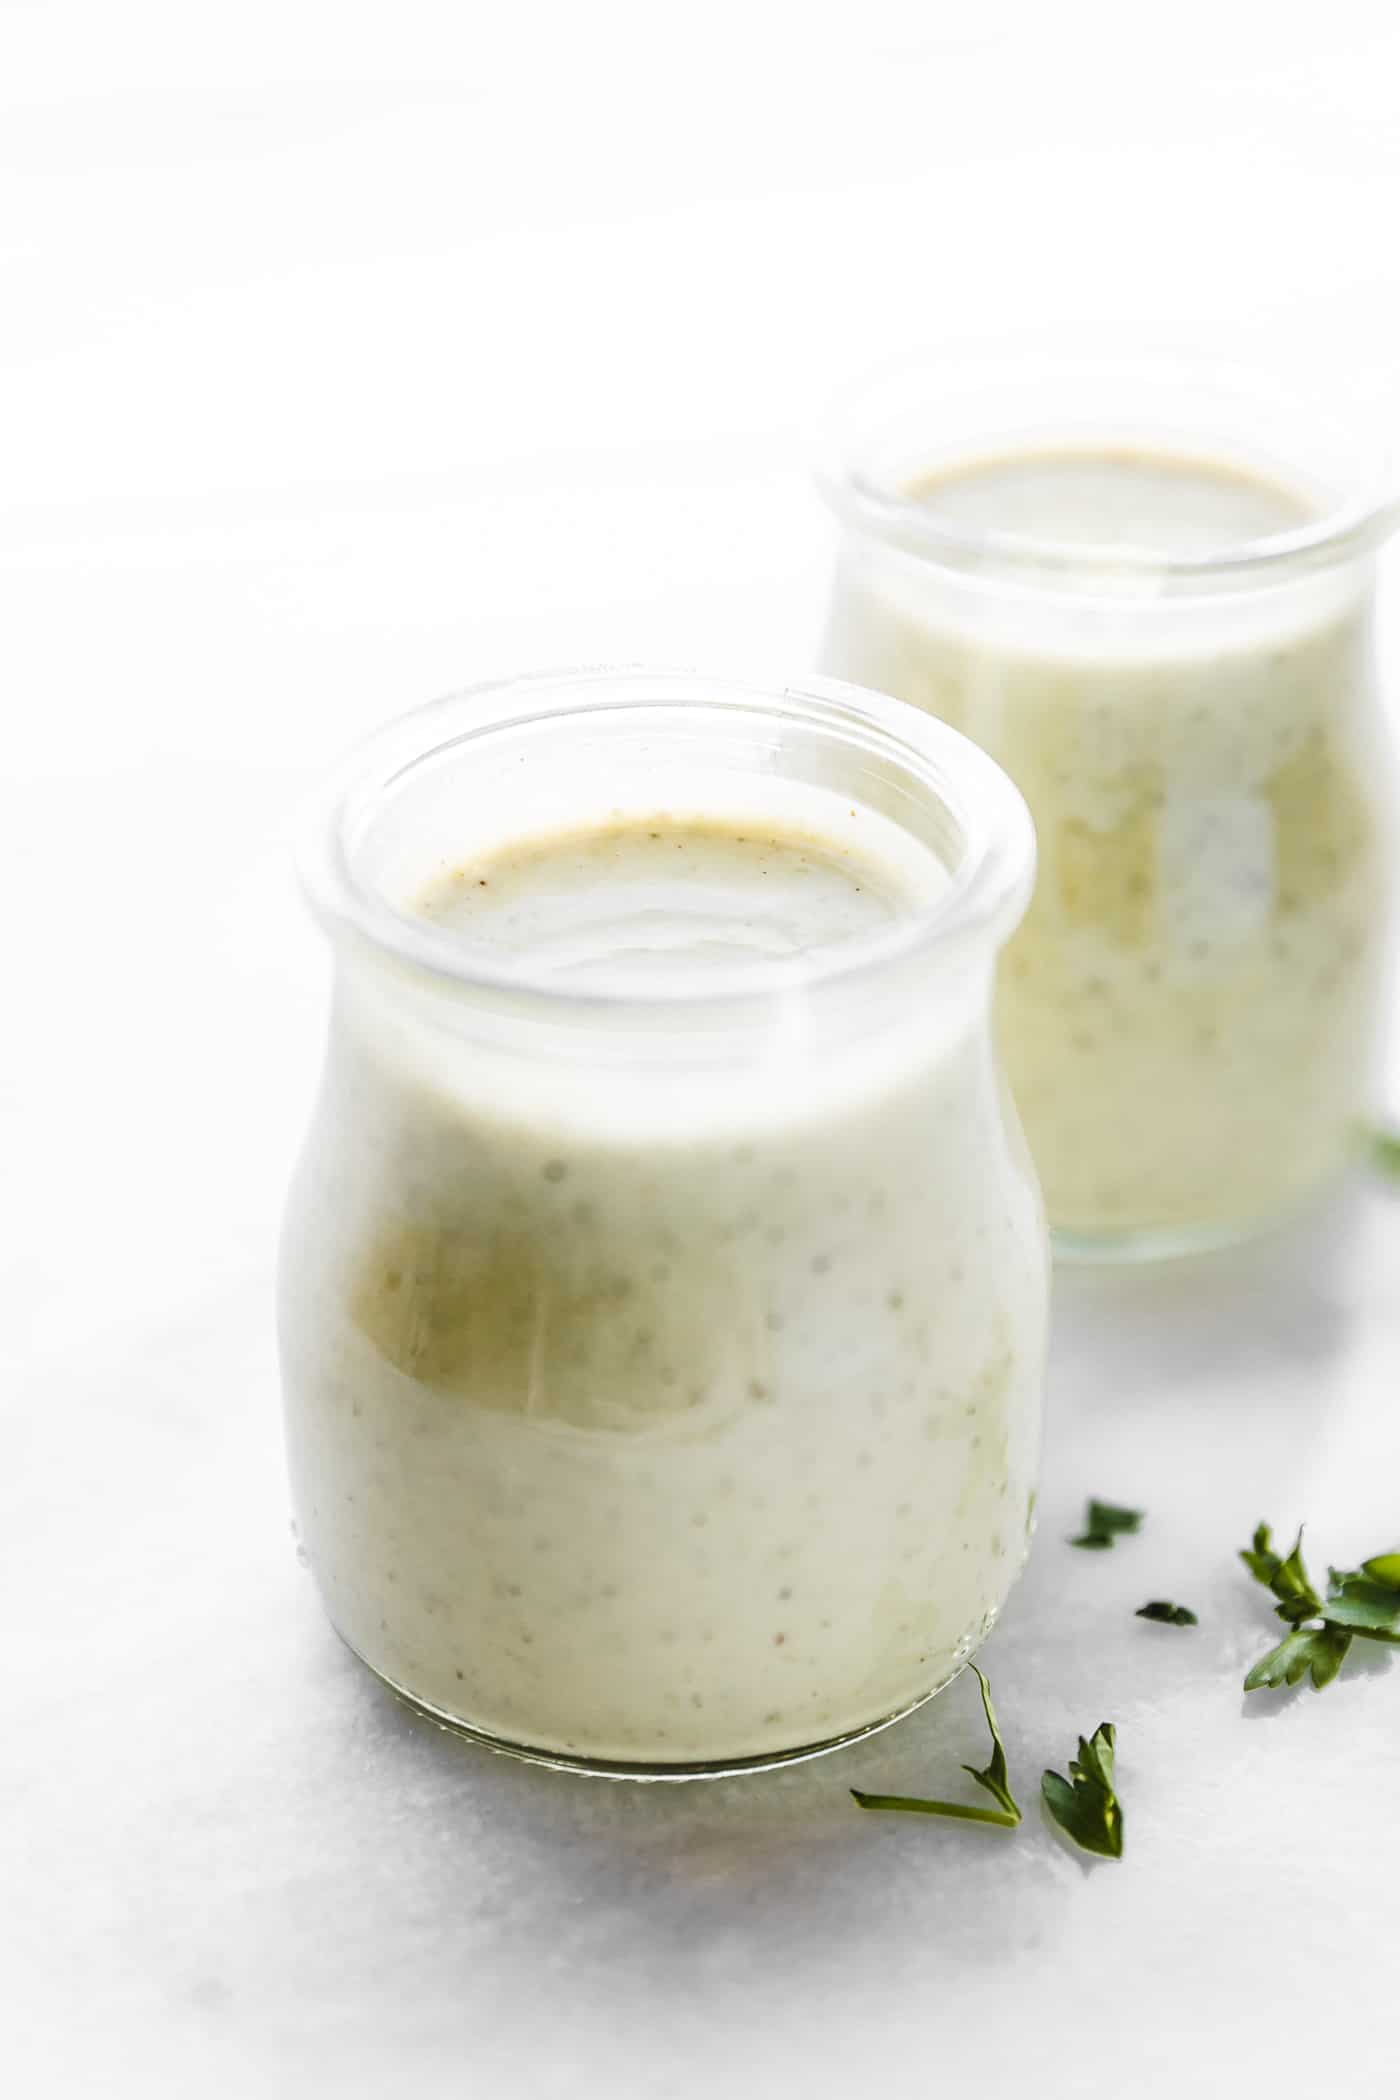 Quick Homemade Vegan ranch dressing (aka "Rancher's Dressing") is a tasty dressing that can be slathered on salad, served as a veggie dip, or dunked in your favorite spicy foods. Vegan, paleo, and Whole 30 friendly, this creamy dairy-free ranch dressing is made from blended cashews, nut milk, herbs, and oil. We're serving it up in a veggie packed snack platter that's perfect for any occasion. #vegan #paleo #ranch